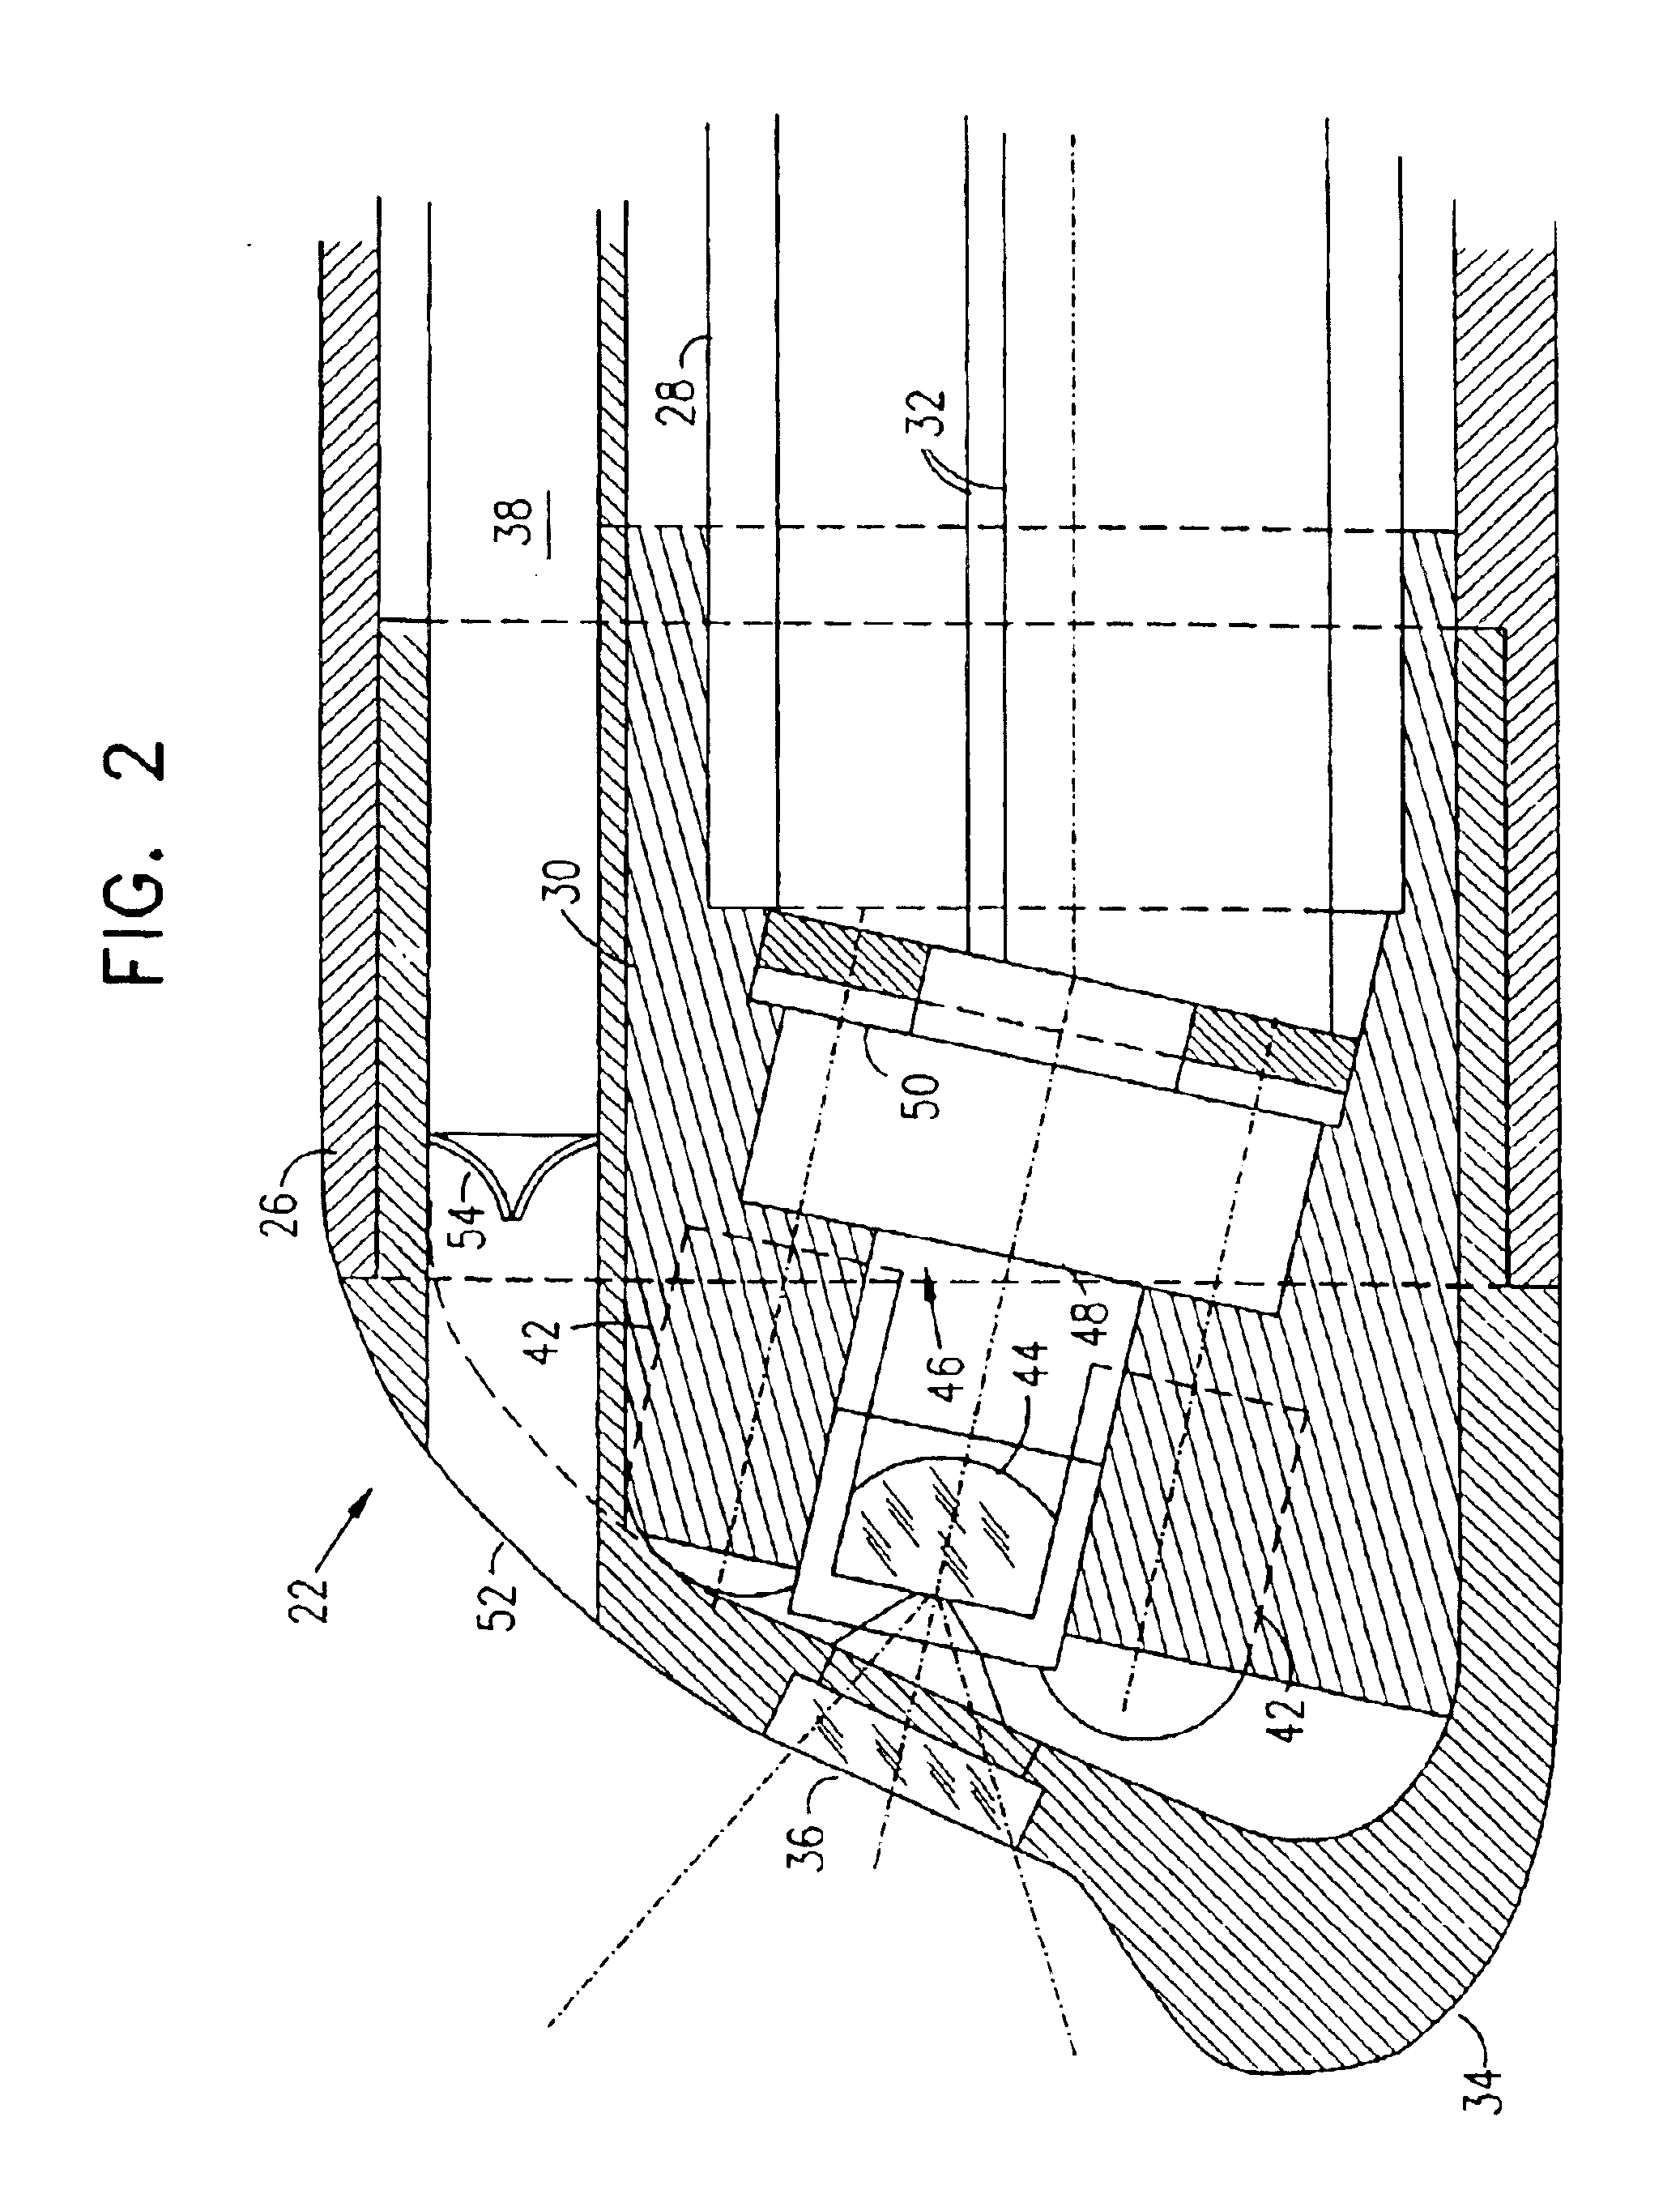 Method for insertion of an endoscope into the colon